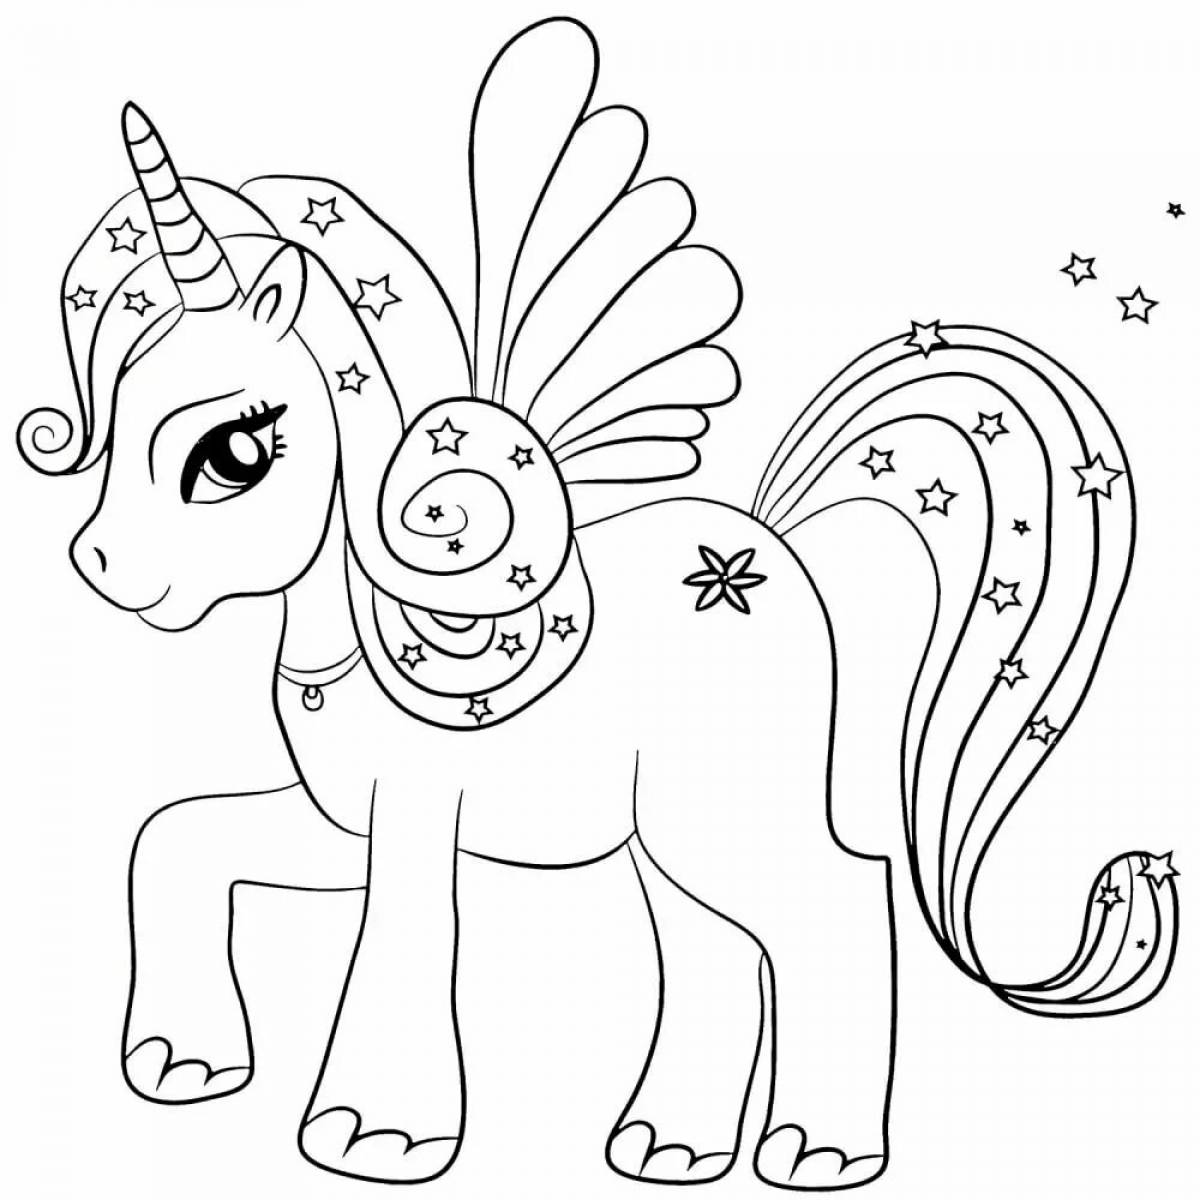 A fun coloring book for 5-6 year olds for girls unicorns